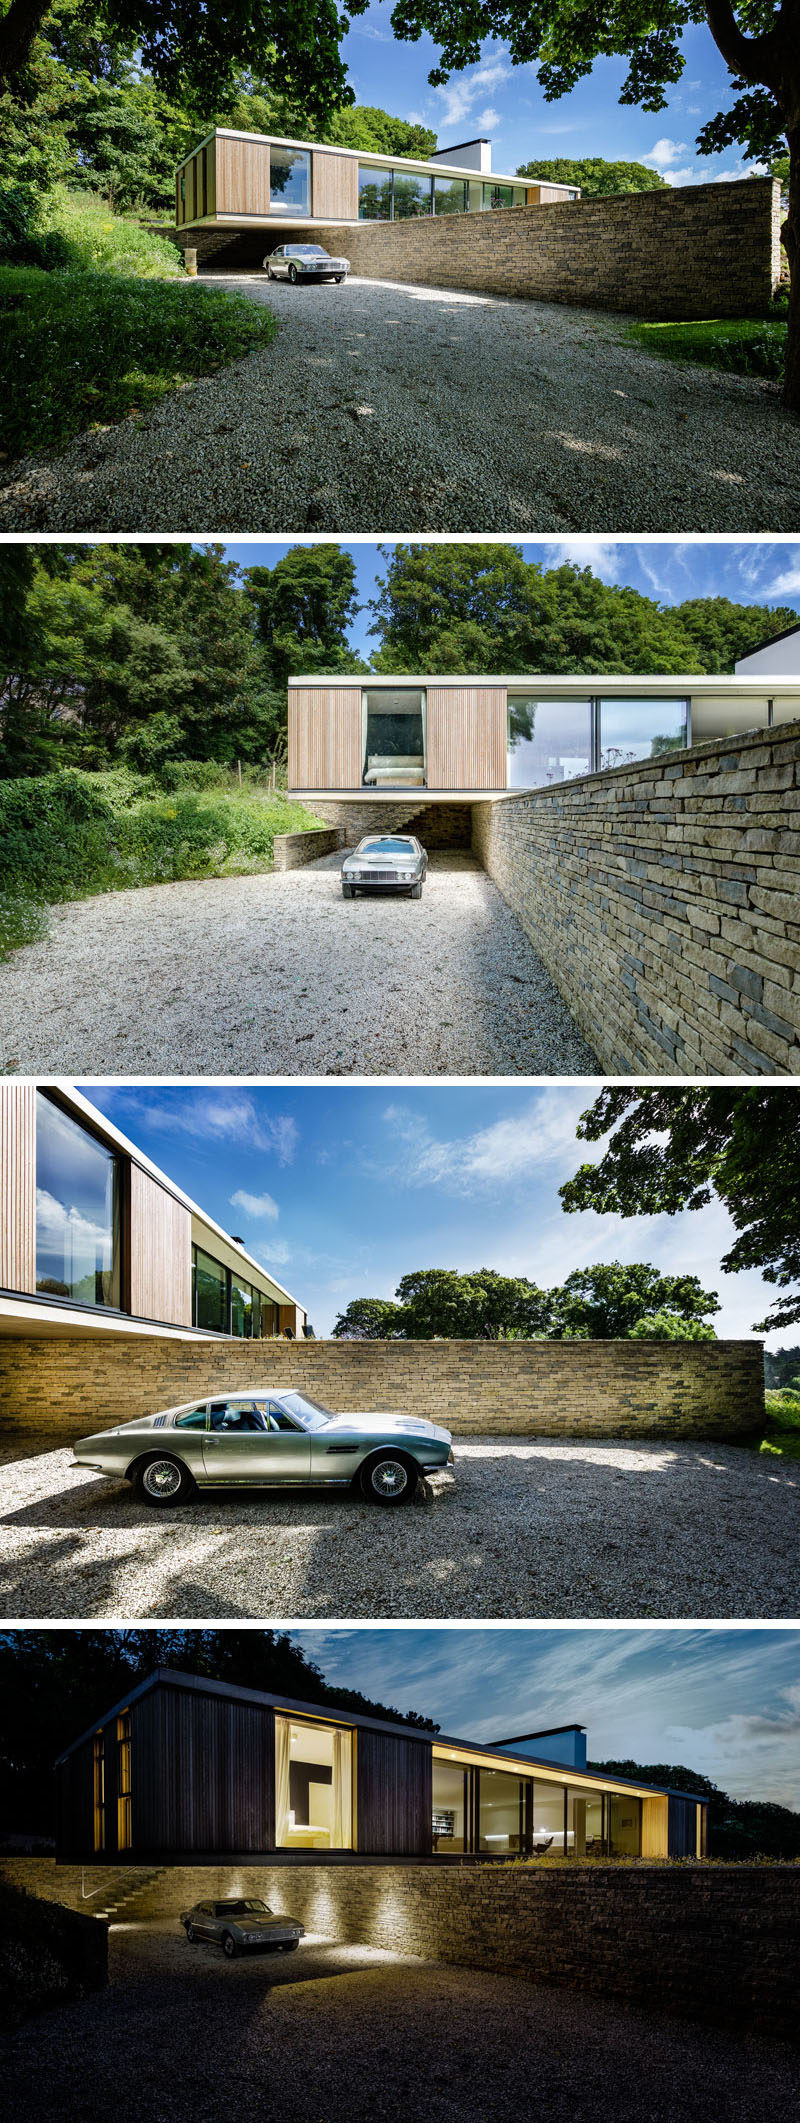 As this home is located on a sloping site, the house cantilevers out over a retaining wall faced in local Purbeck stone, and creates a sheltered parking area. Lighting has been added underneath the cantilevered section to make it easier to see at night.